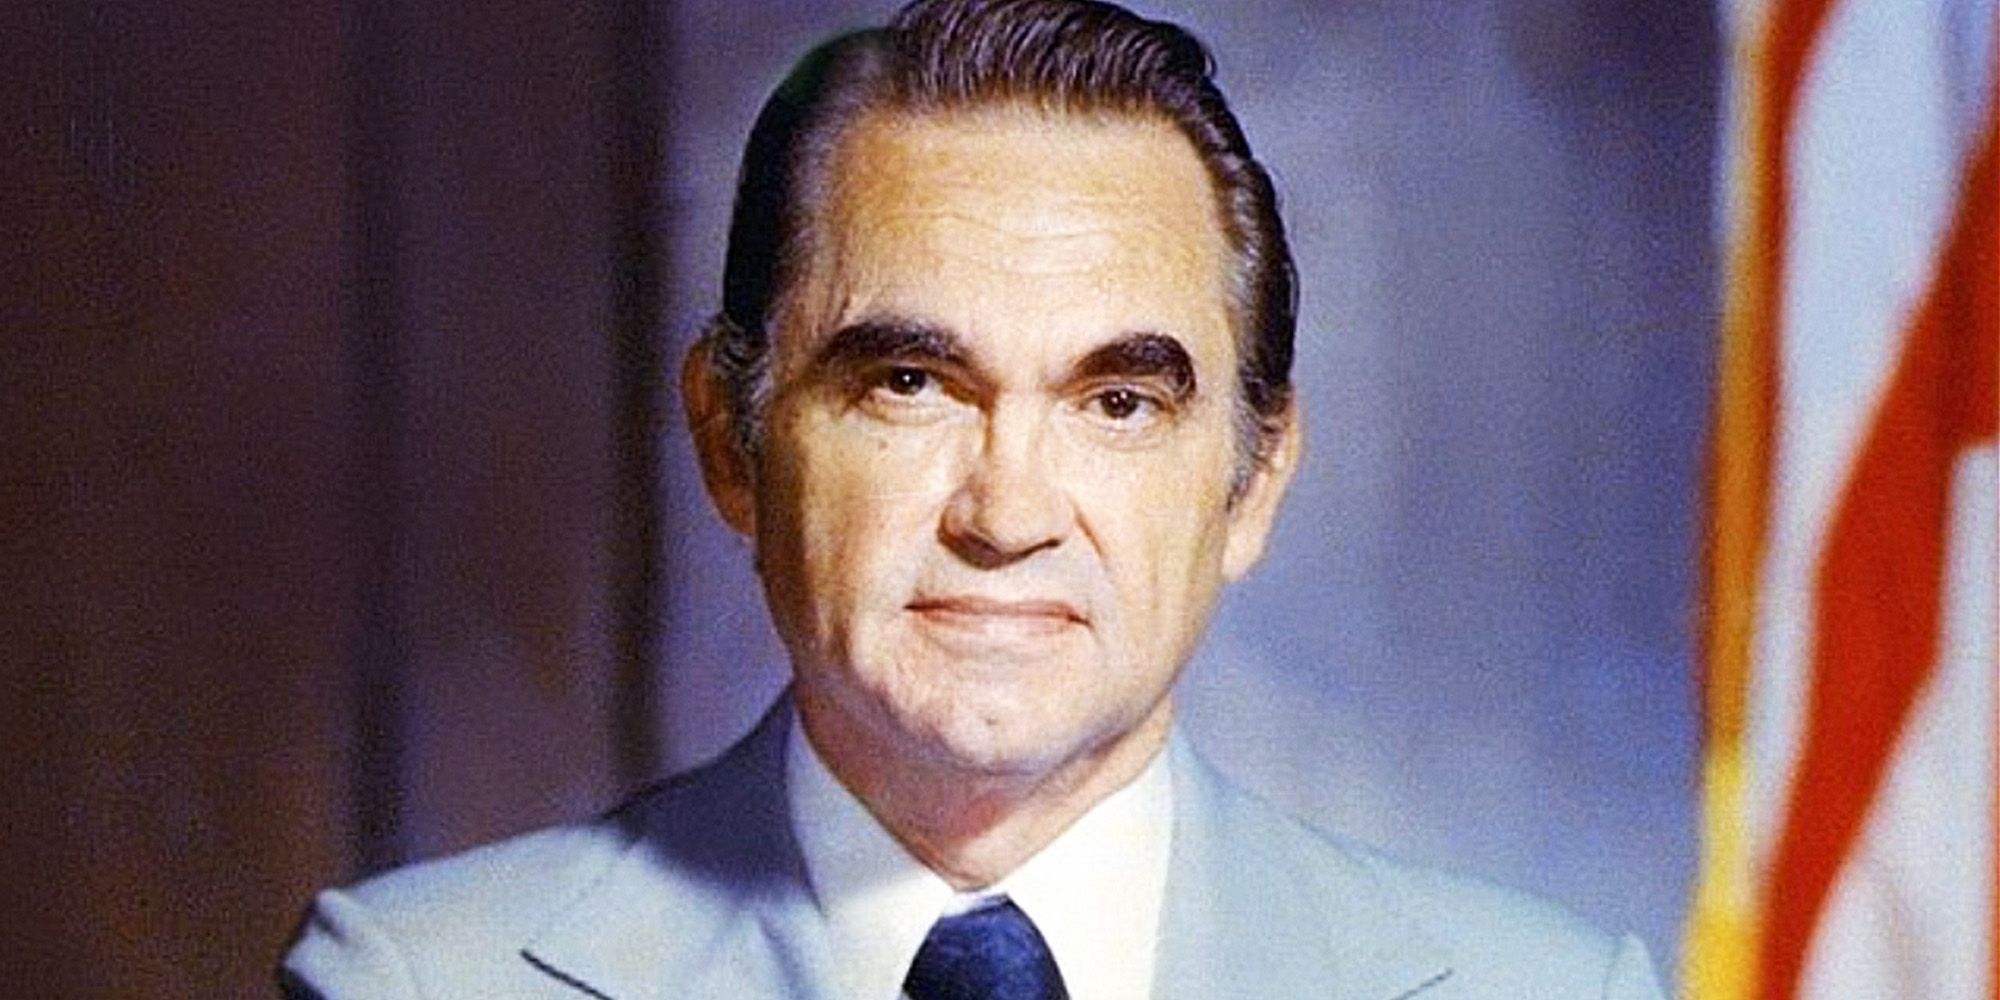 Shirley Movie: What Happened To George Wallace After His Assassination Attempt